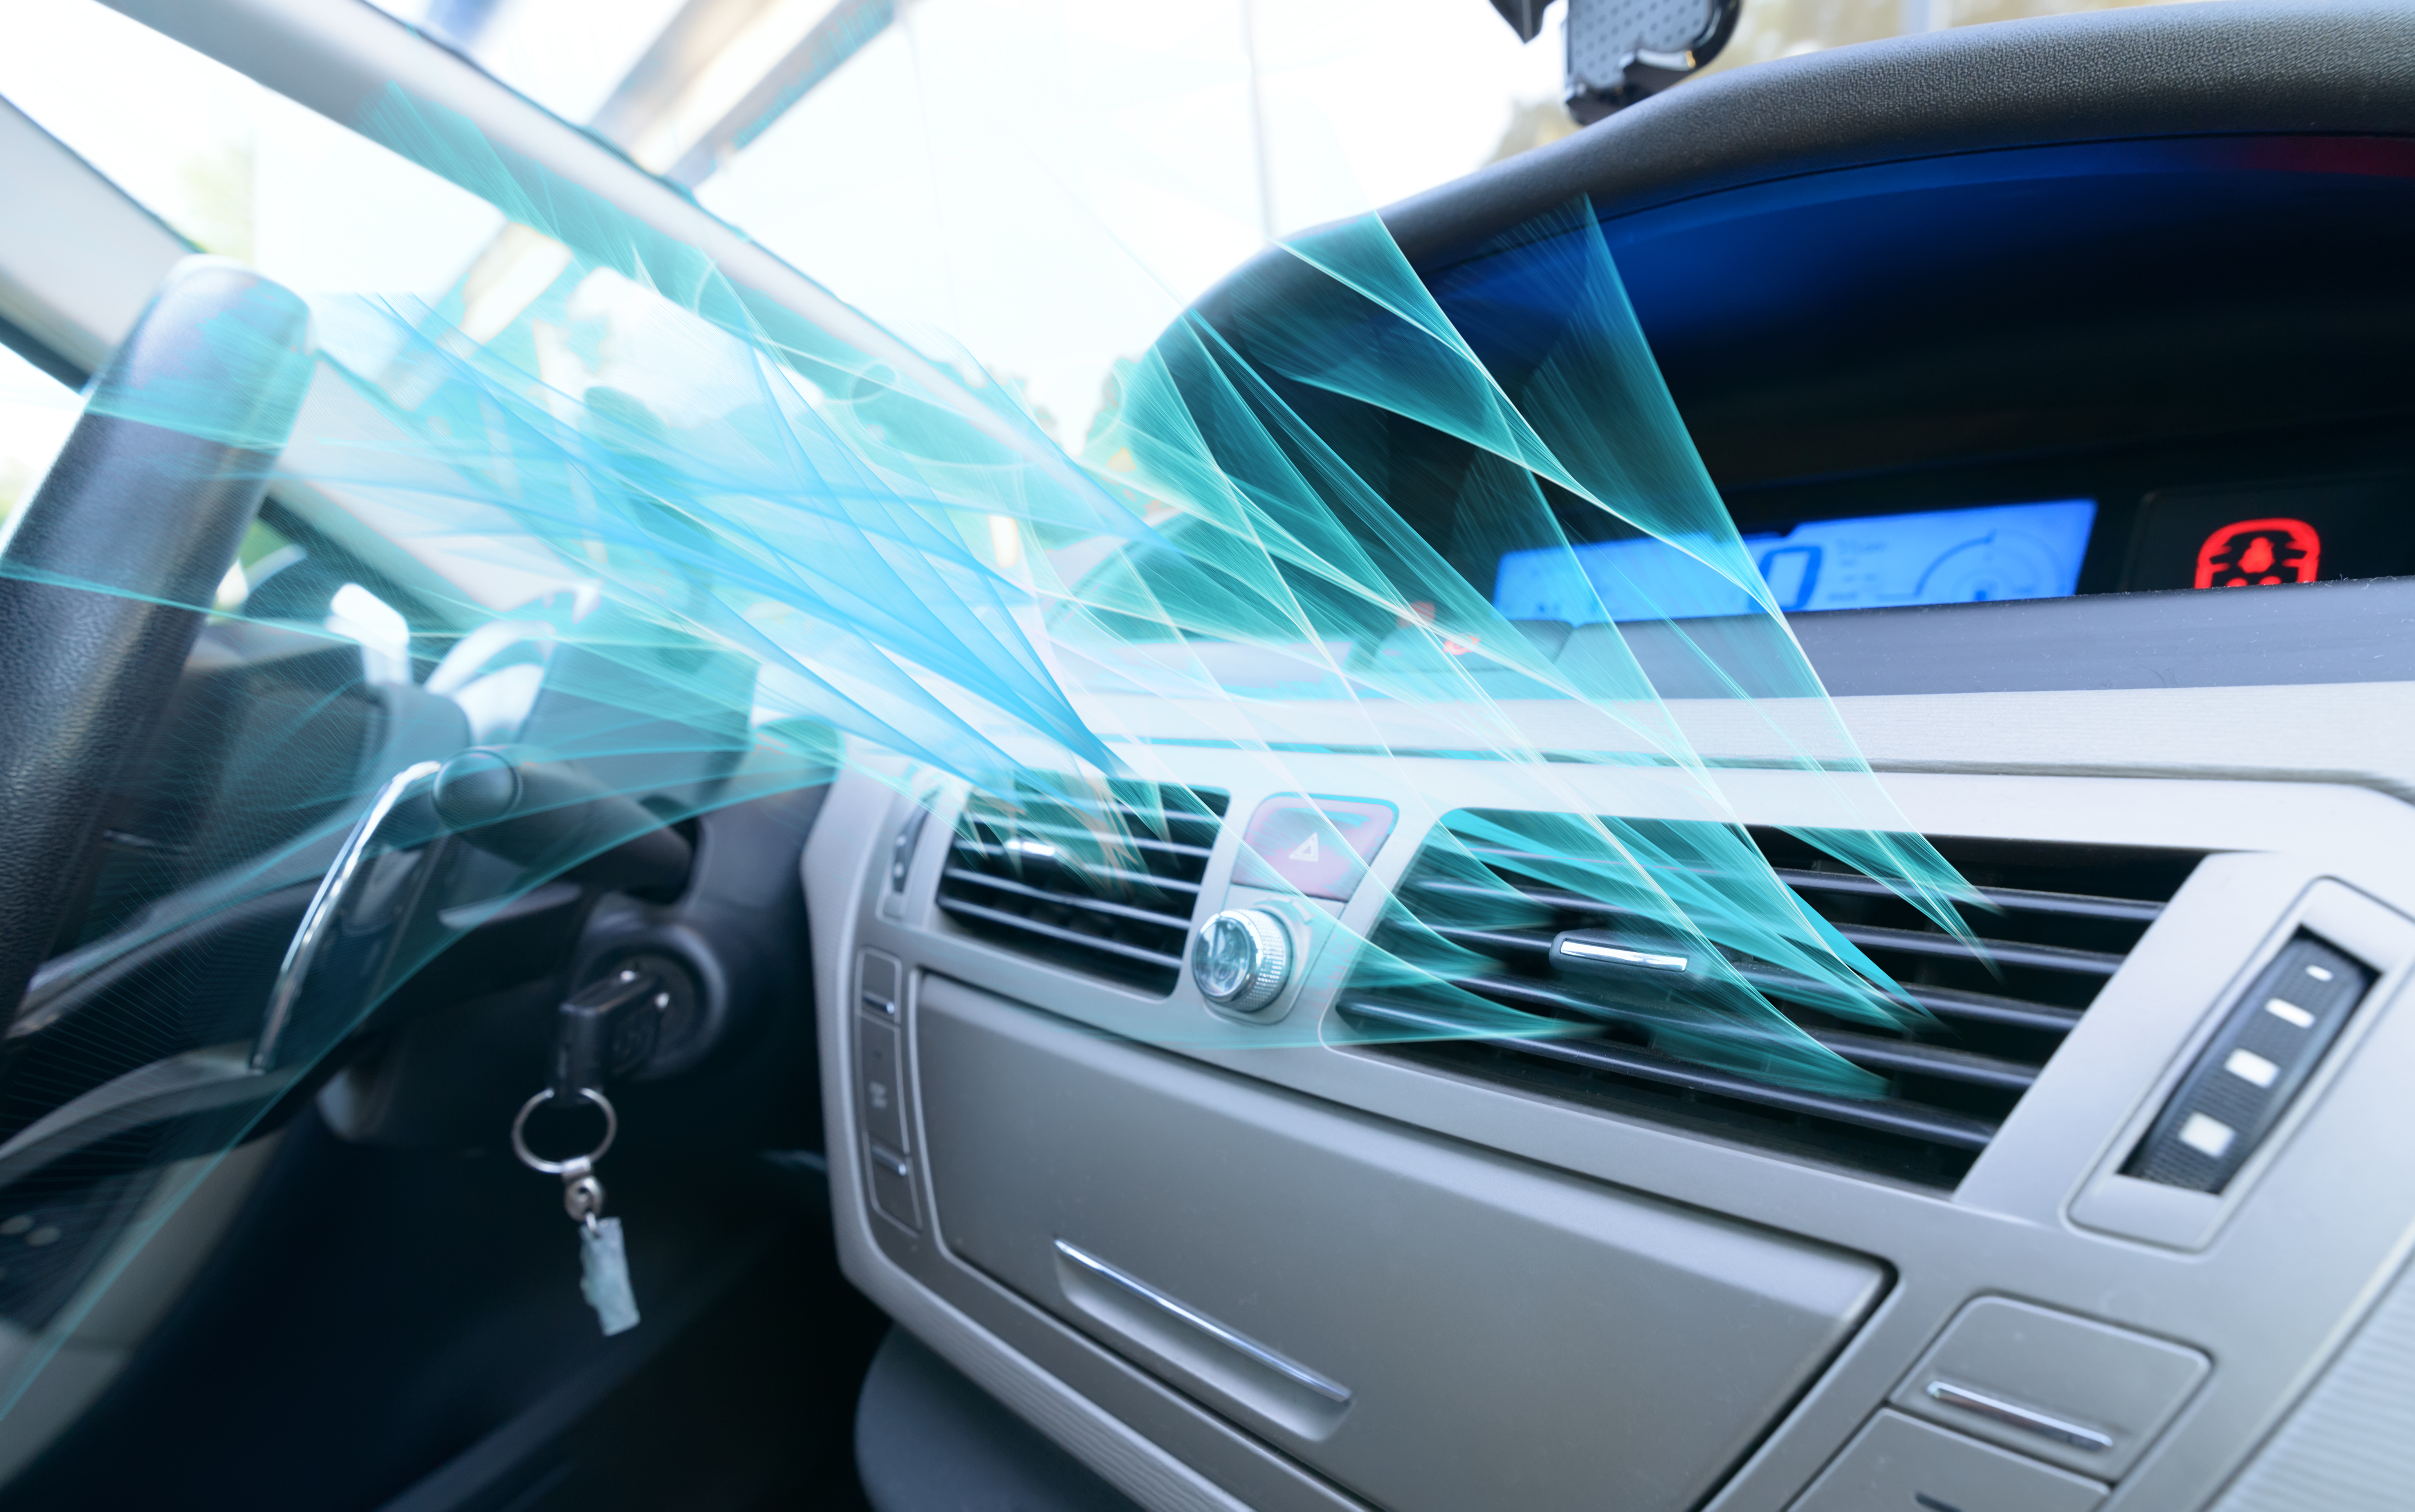 How to Keep Your Car's A/C Running Efficiently in Hot Weather